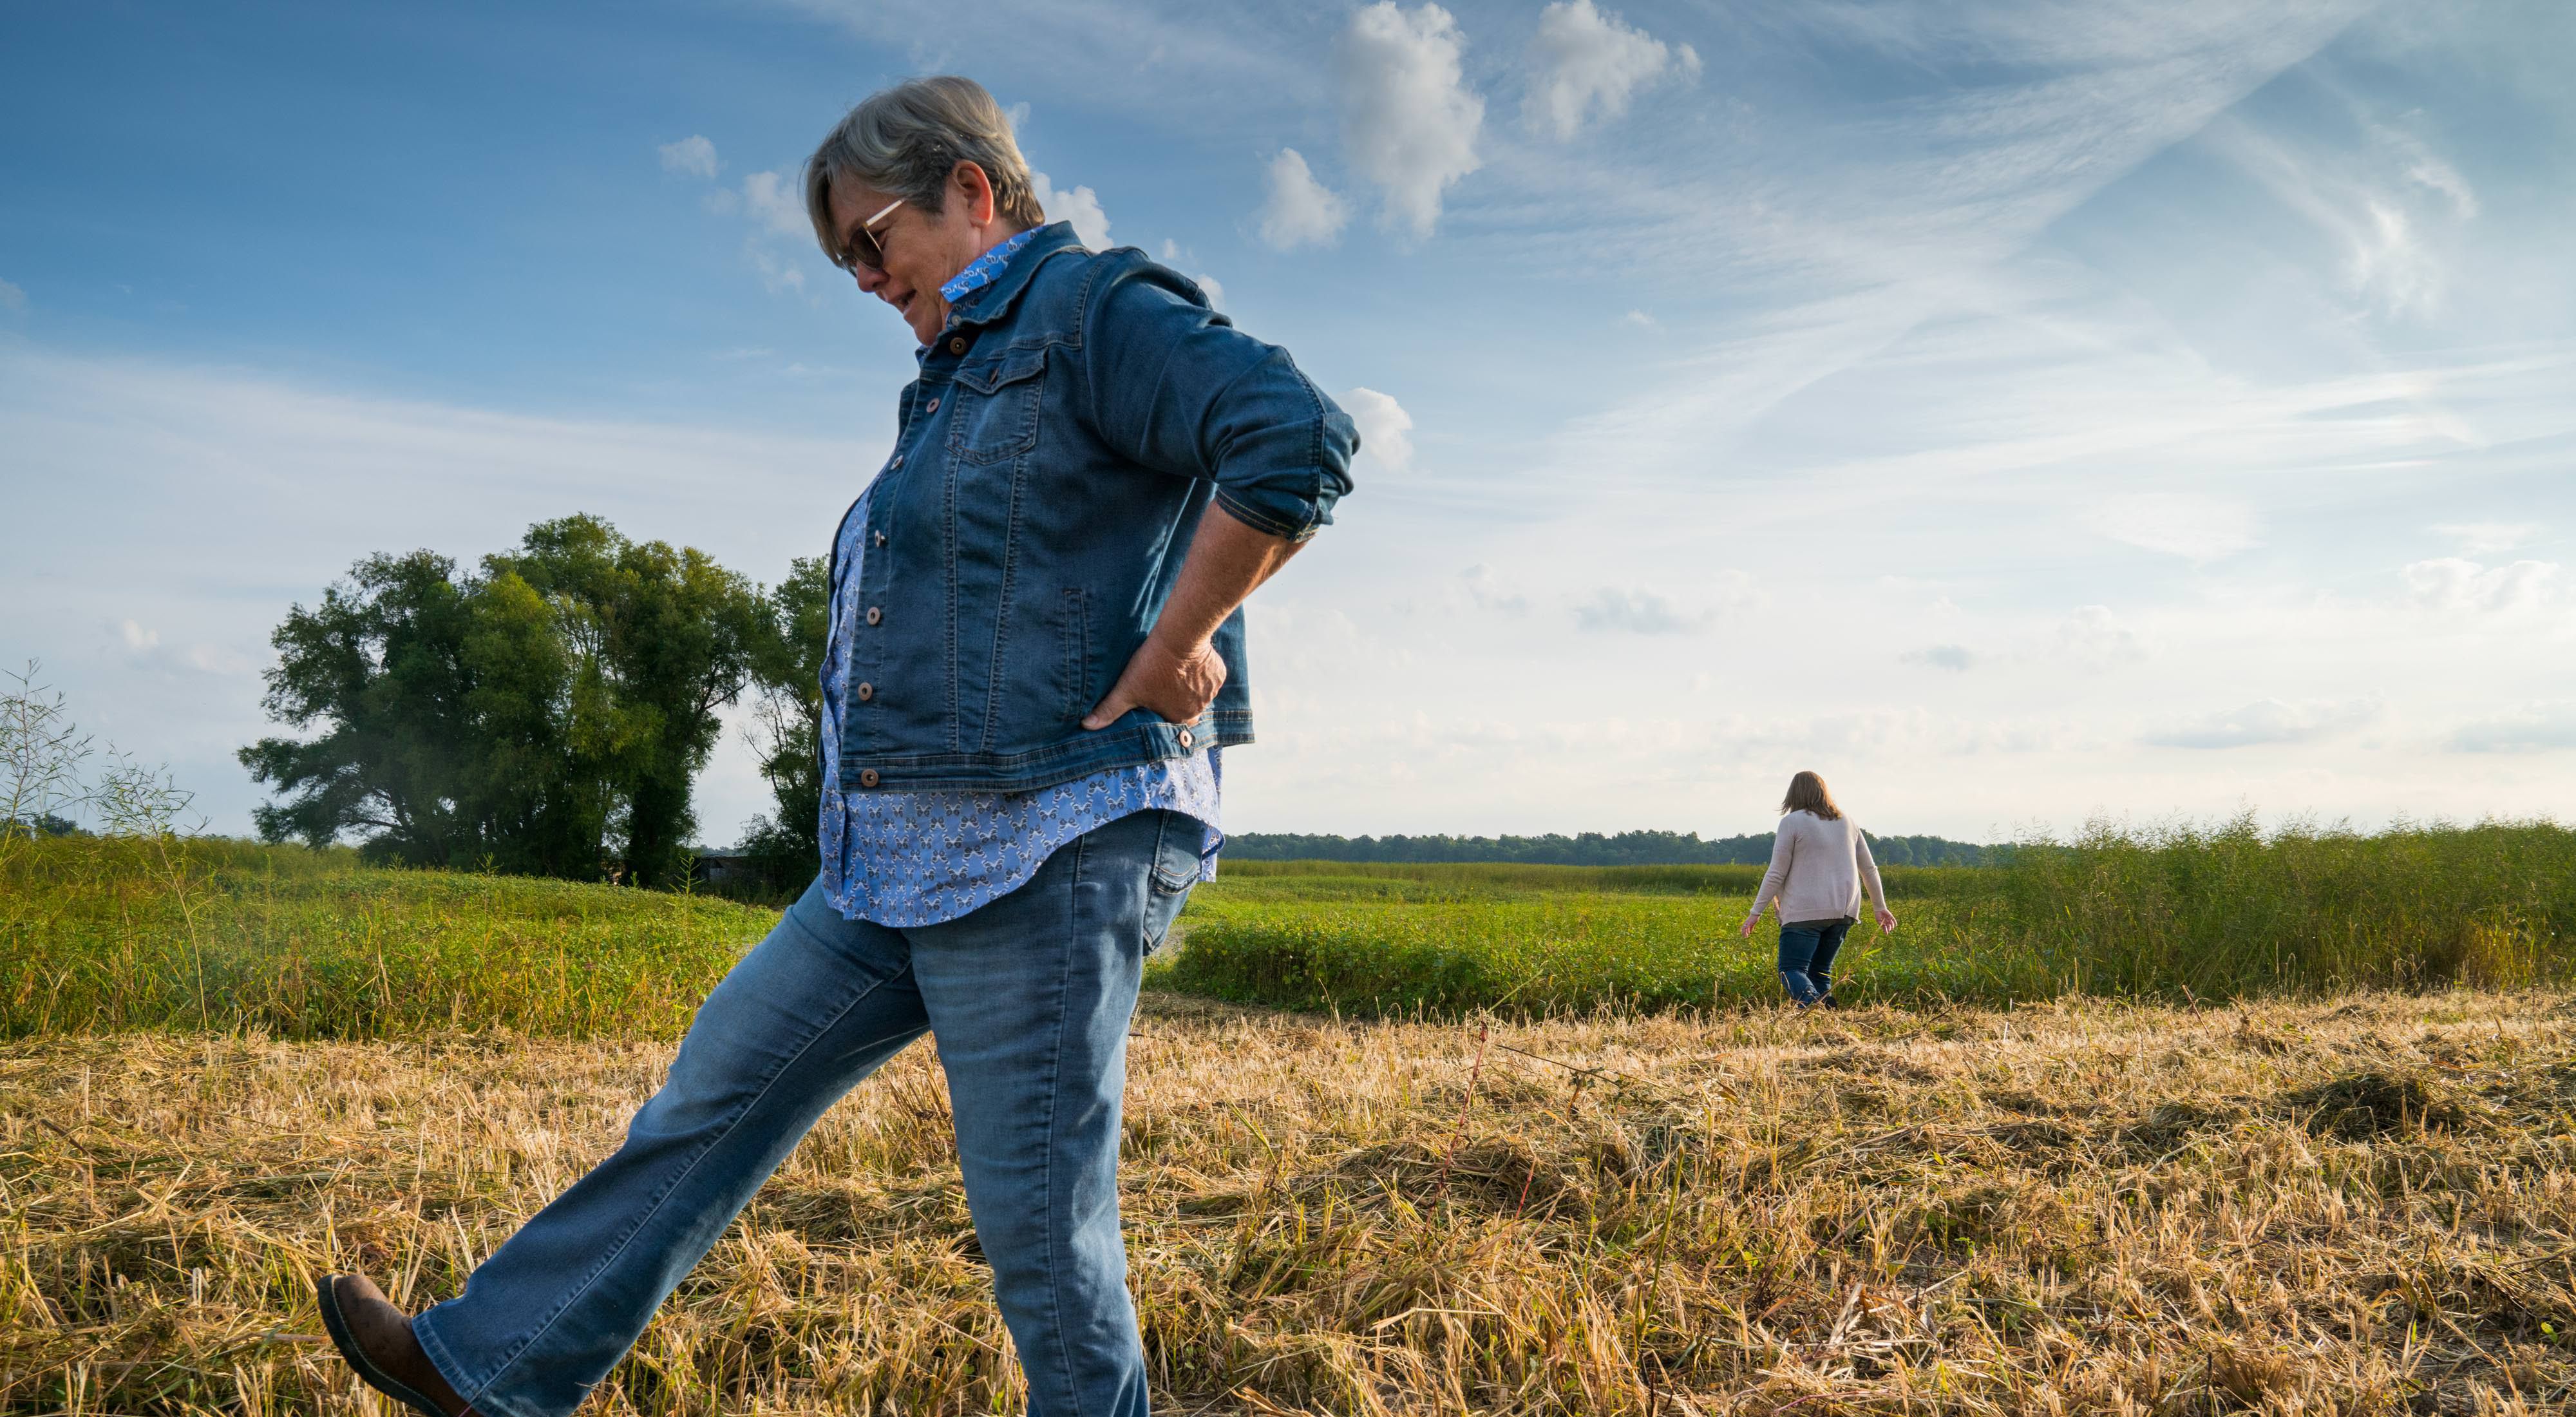 A woman kicks at the grass on her family's farm